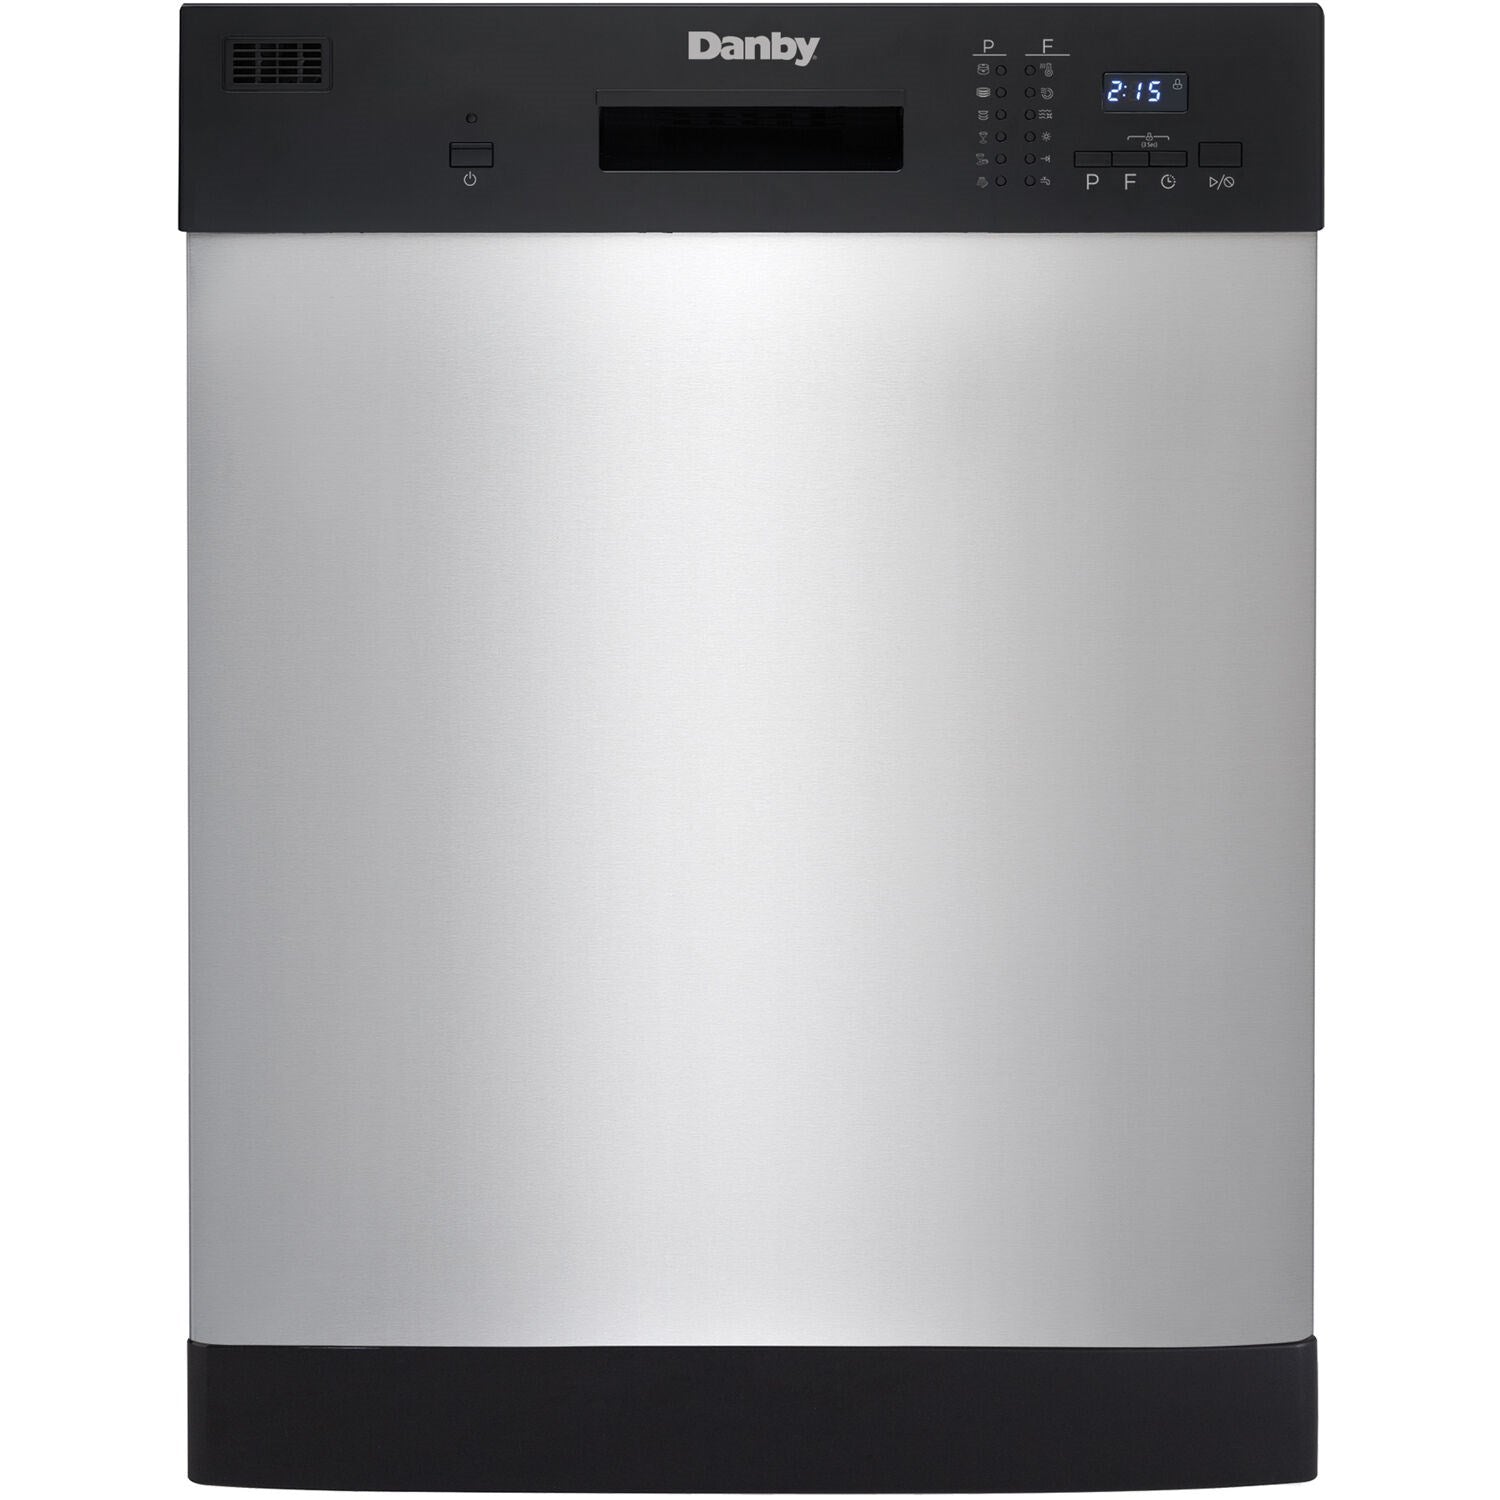 Danby - 24 inch Built-In Dishwasher,12 Place Settings, SS Interior, 6 Wash Programs | DDW2404EBSS